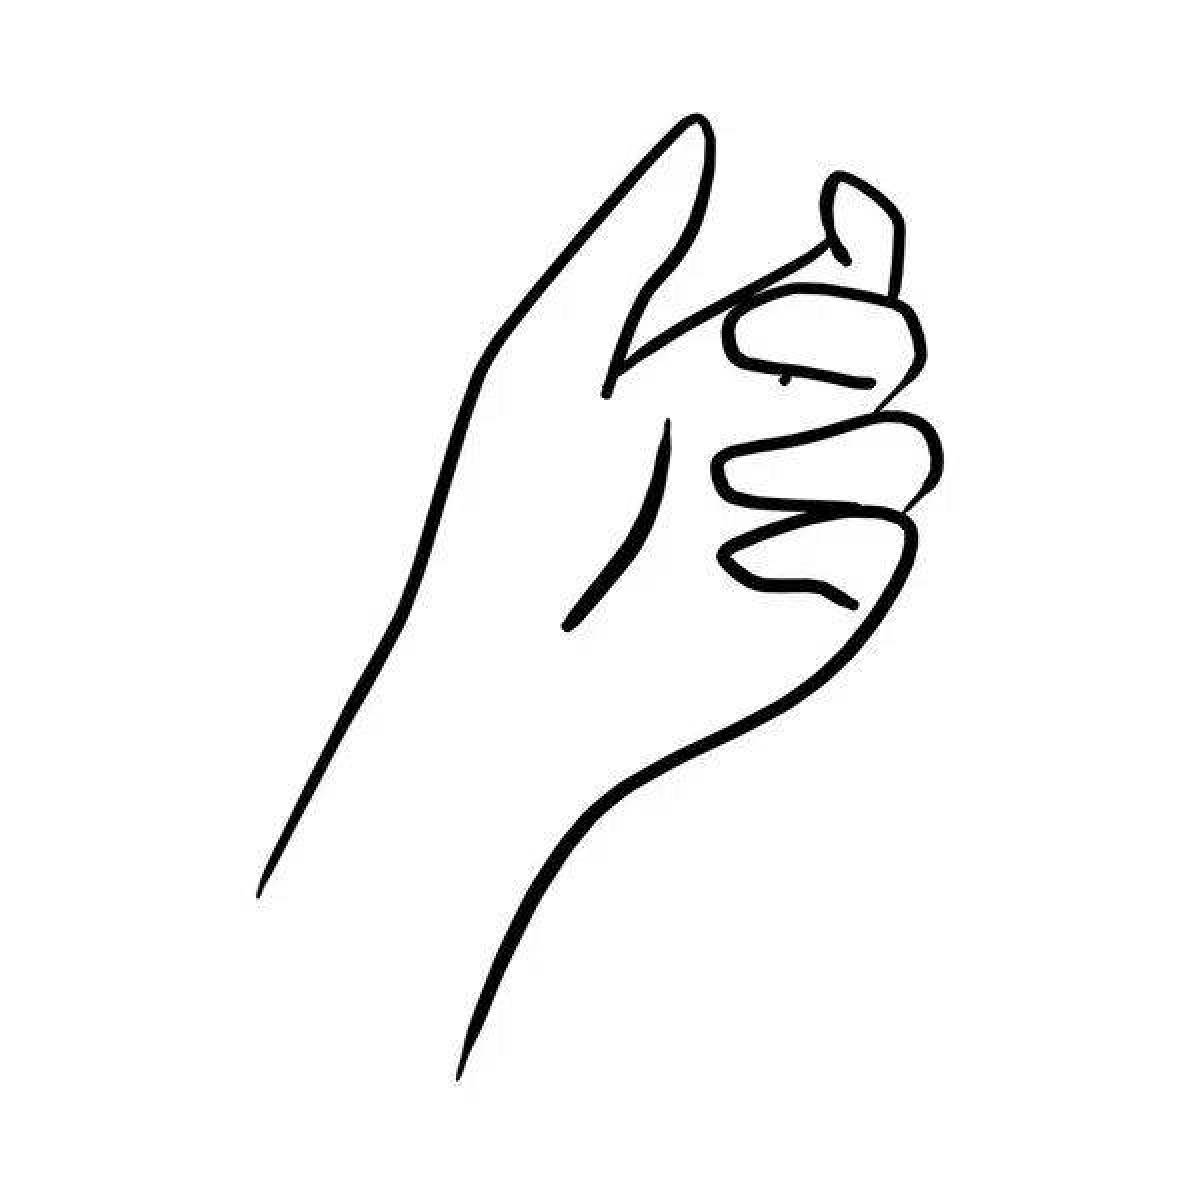 Amazing hand thing wednesday coloring page